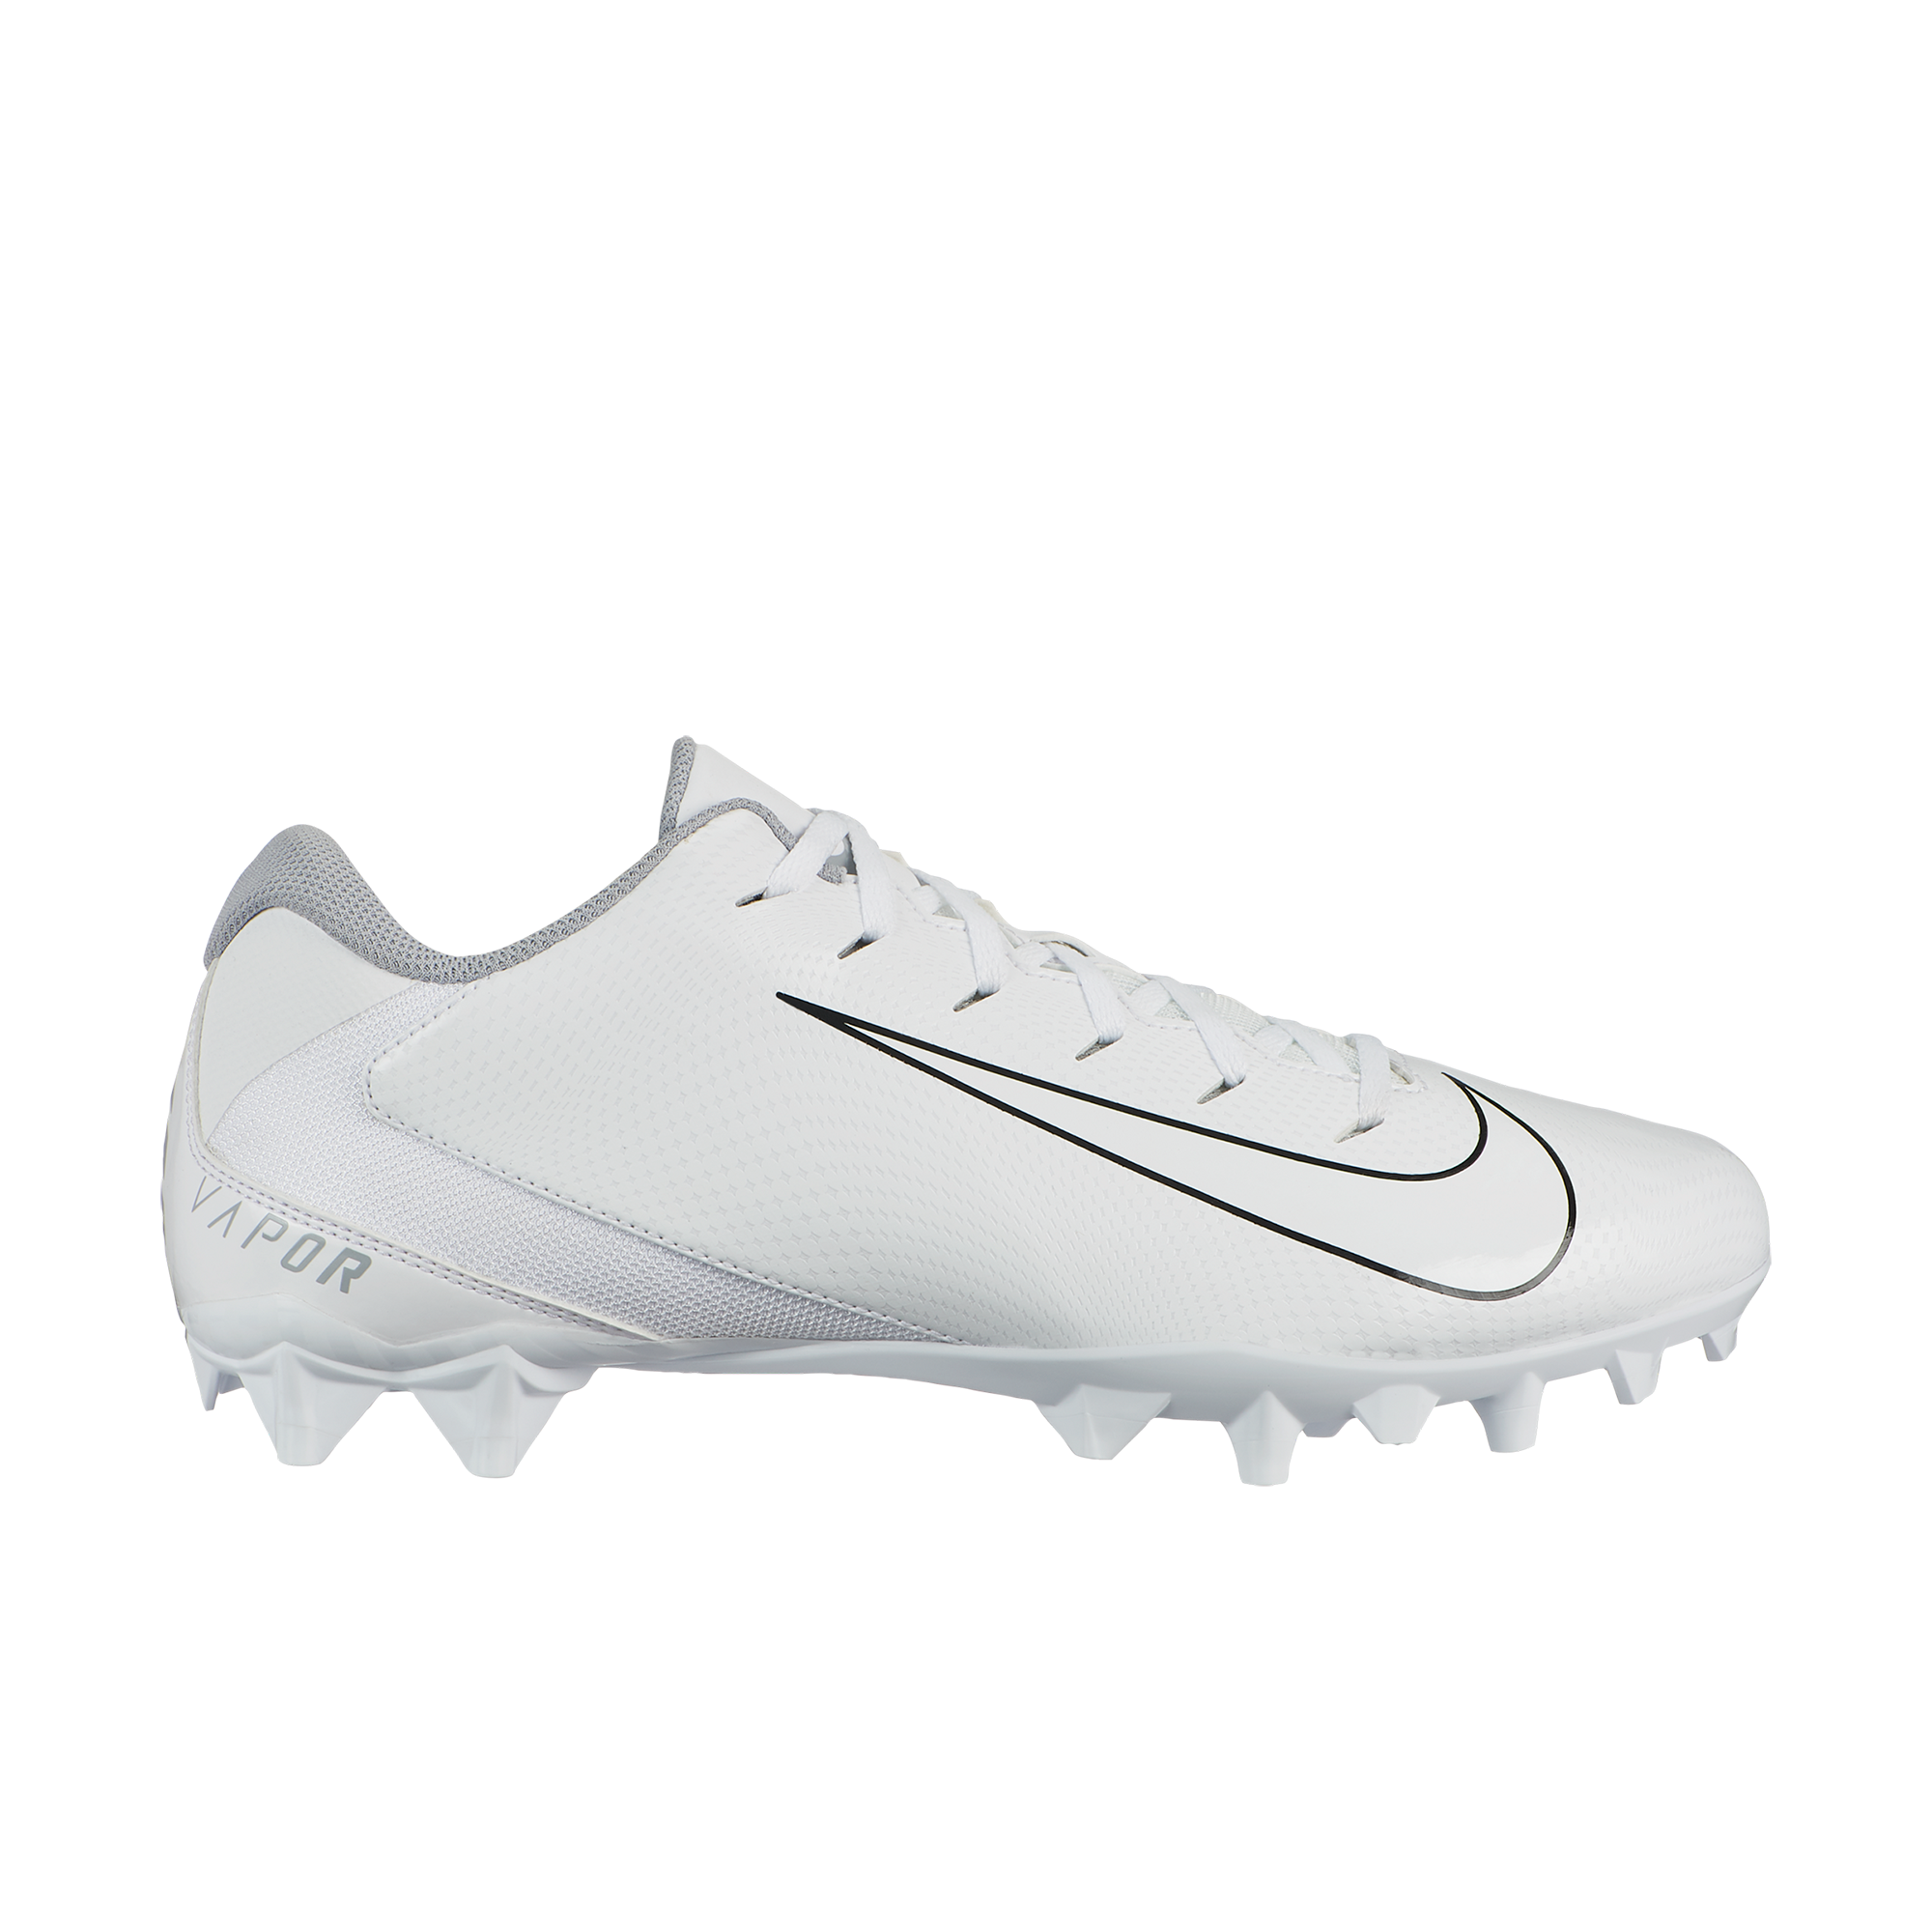 all white football cleats